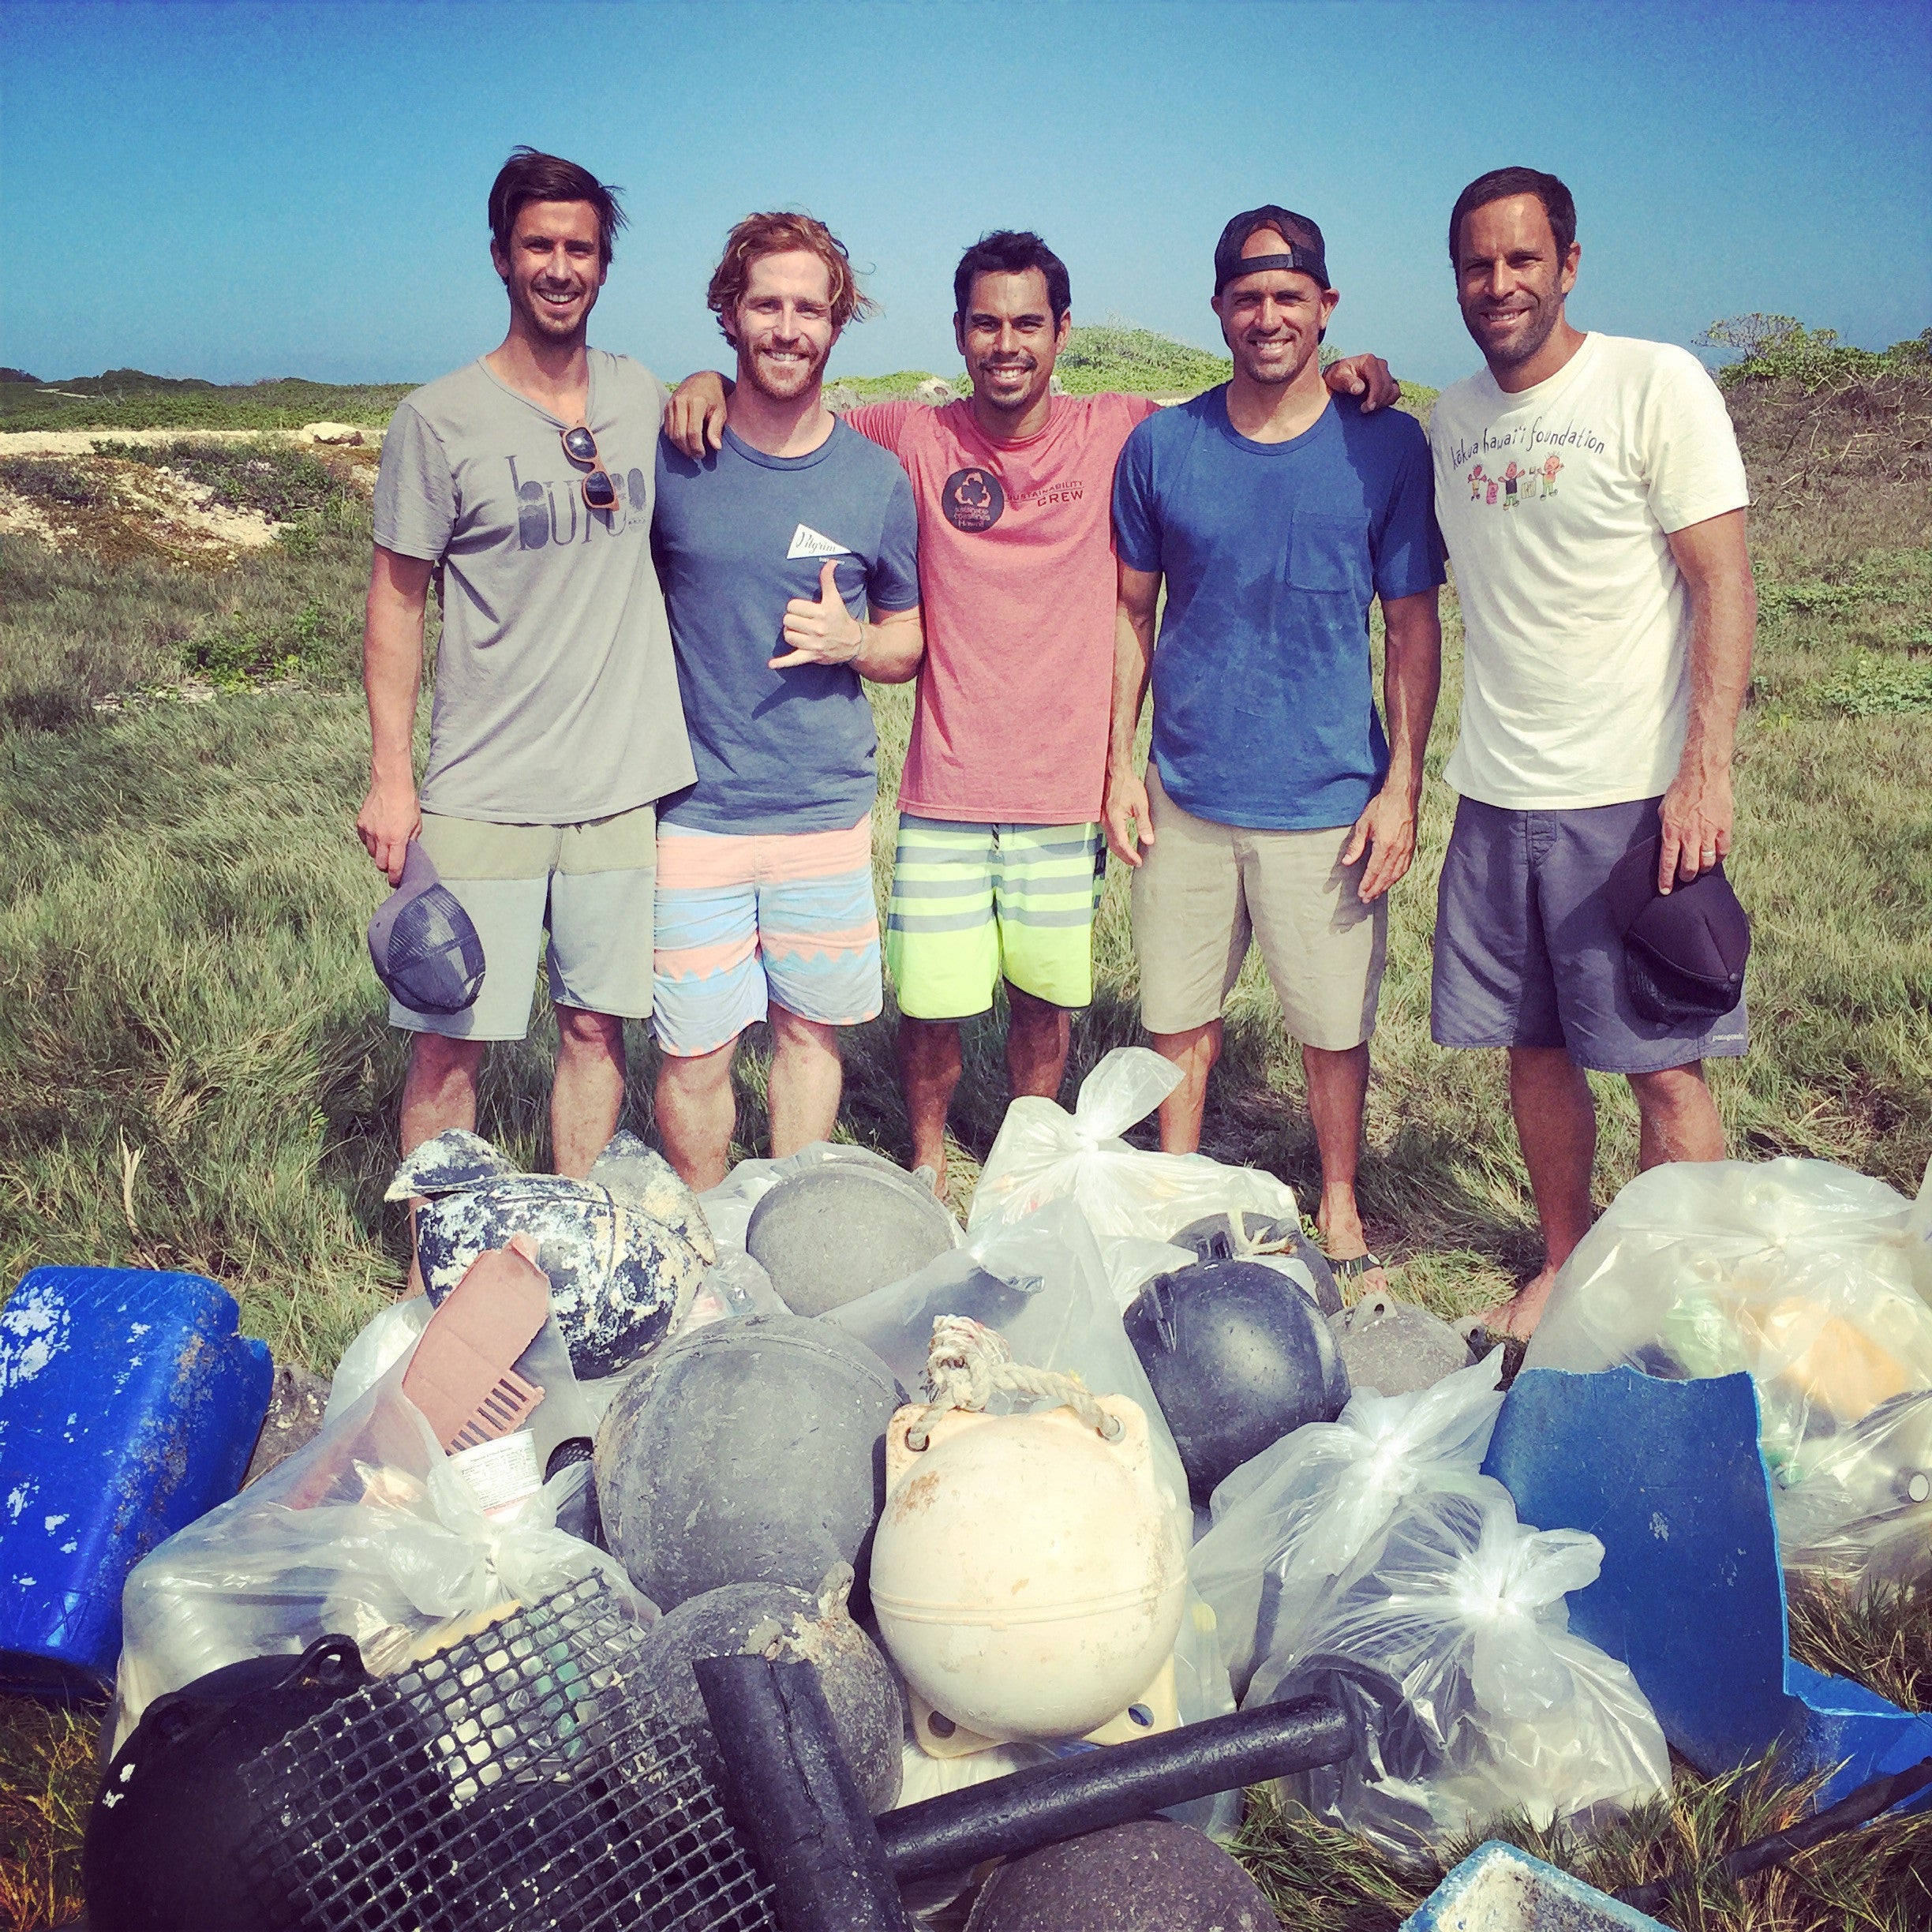 Bureo joined over 400 volunteers [including a few decent surfers!] to help remove over 3,900 pounds from Kahuku Beach in 2015